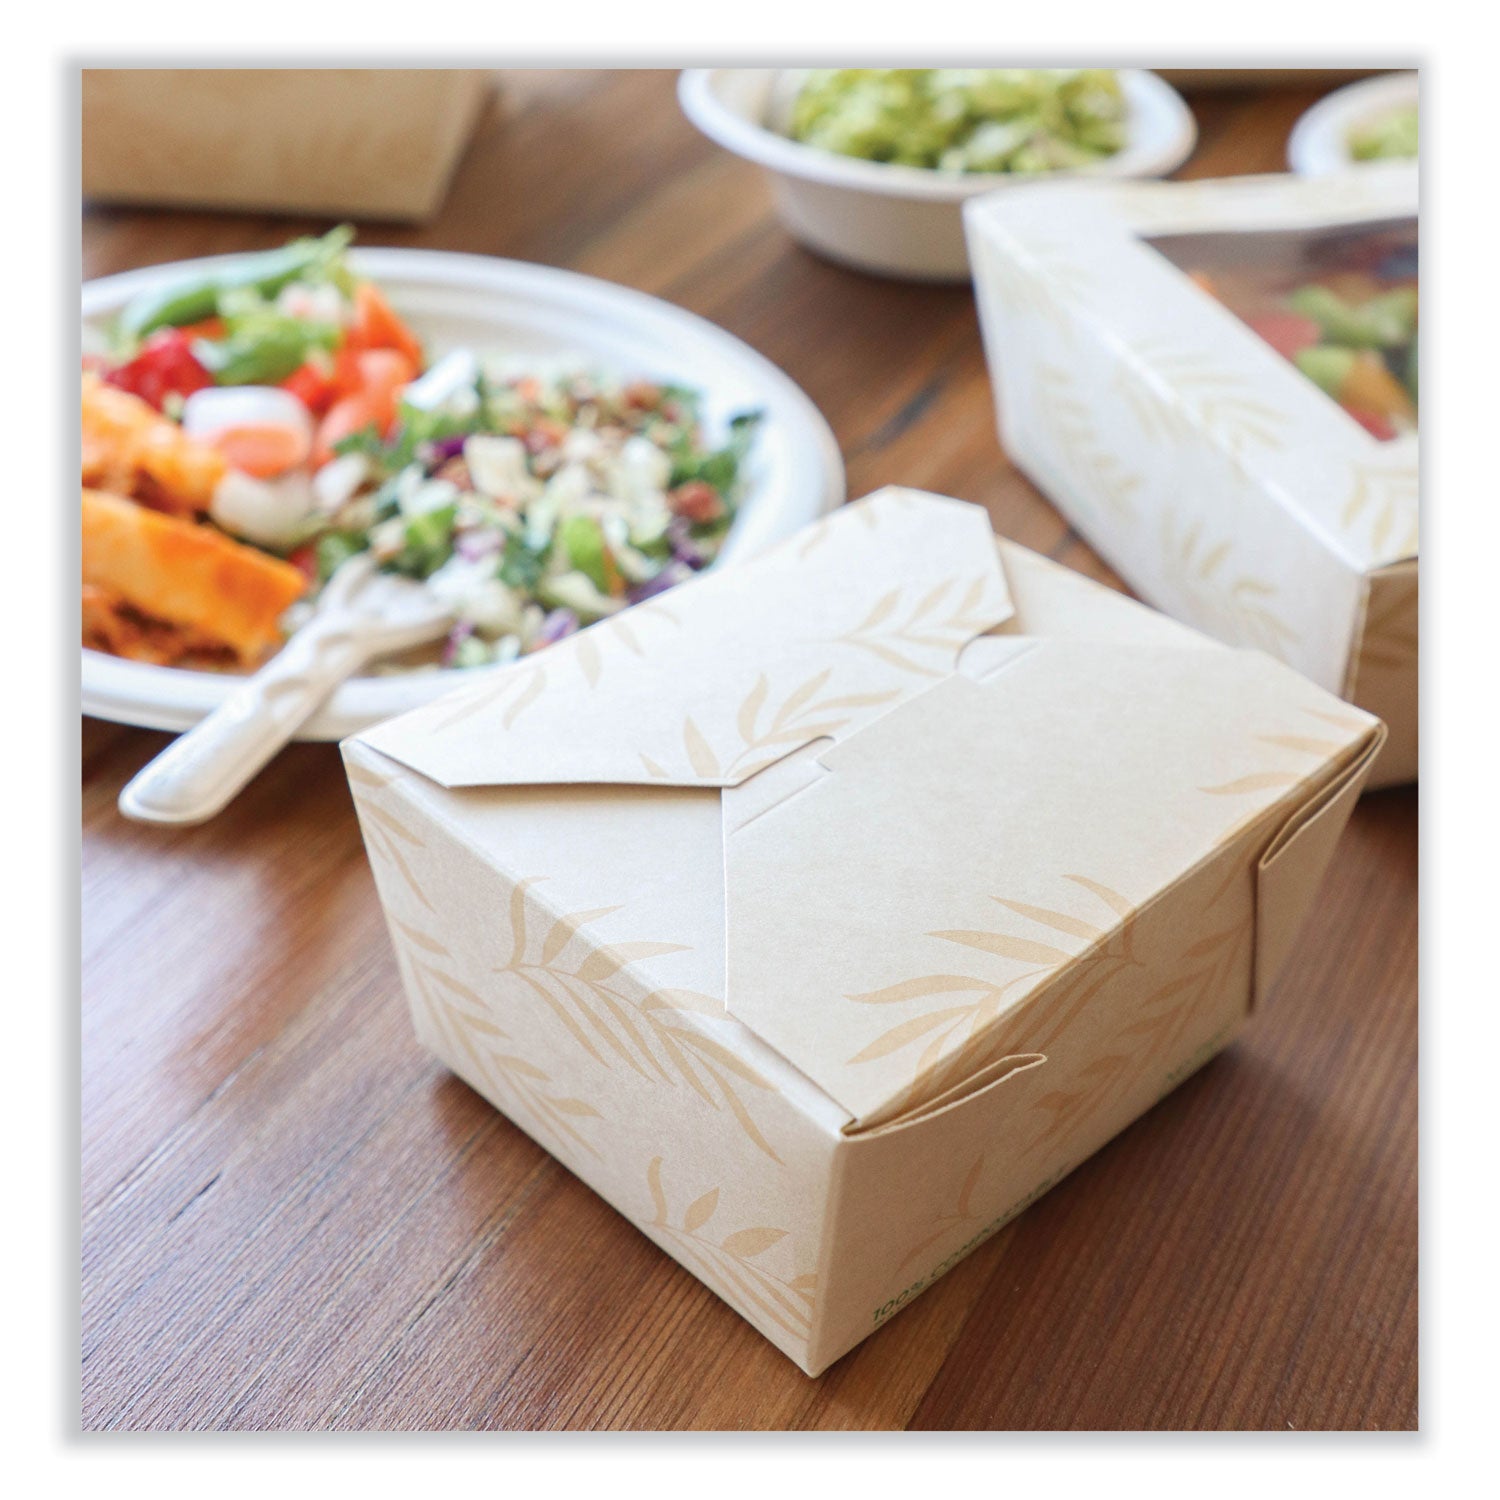 no-tree-folded-takeout-containers-26-oz-42-x-52-x-25-natural-sugarcane-450-carton_wortont1 - 3